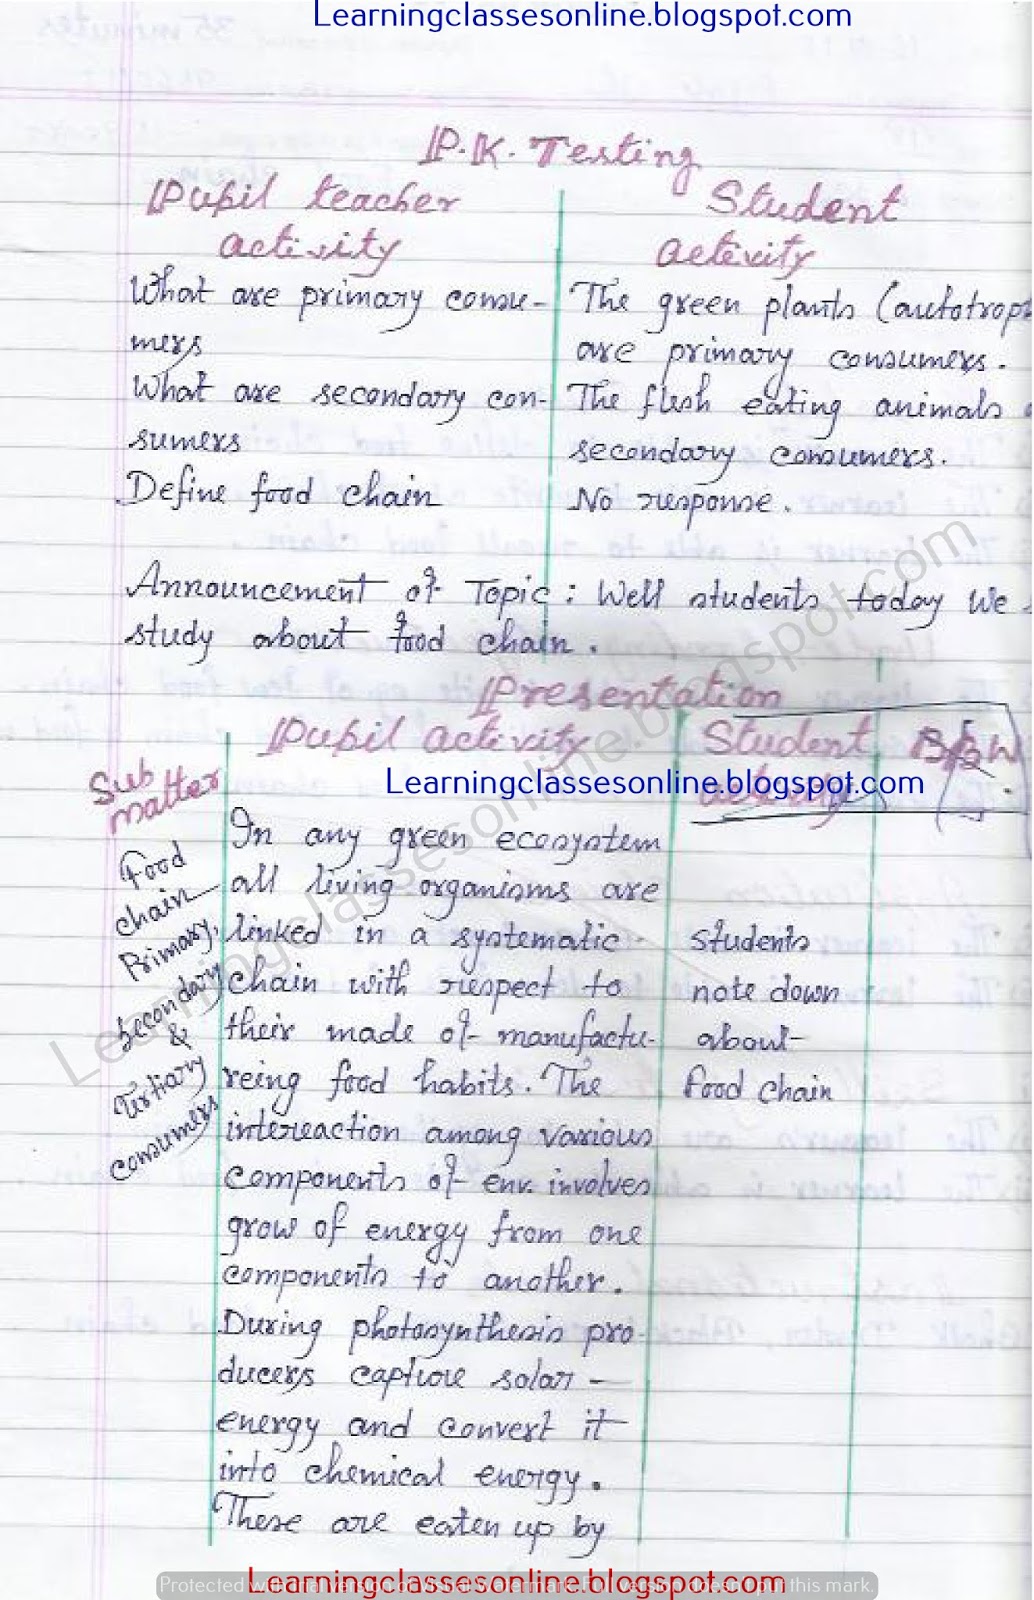 B.Ed biological Science lesson plan on Food chain for class 7 and 8